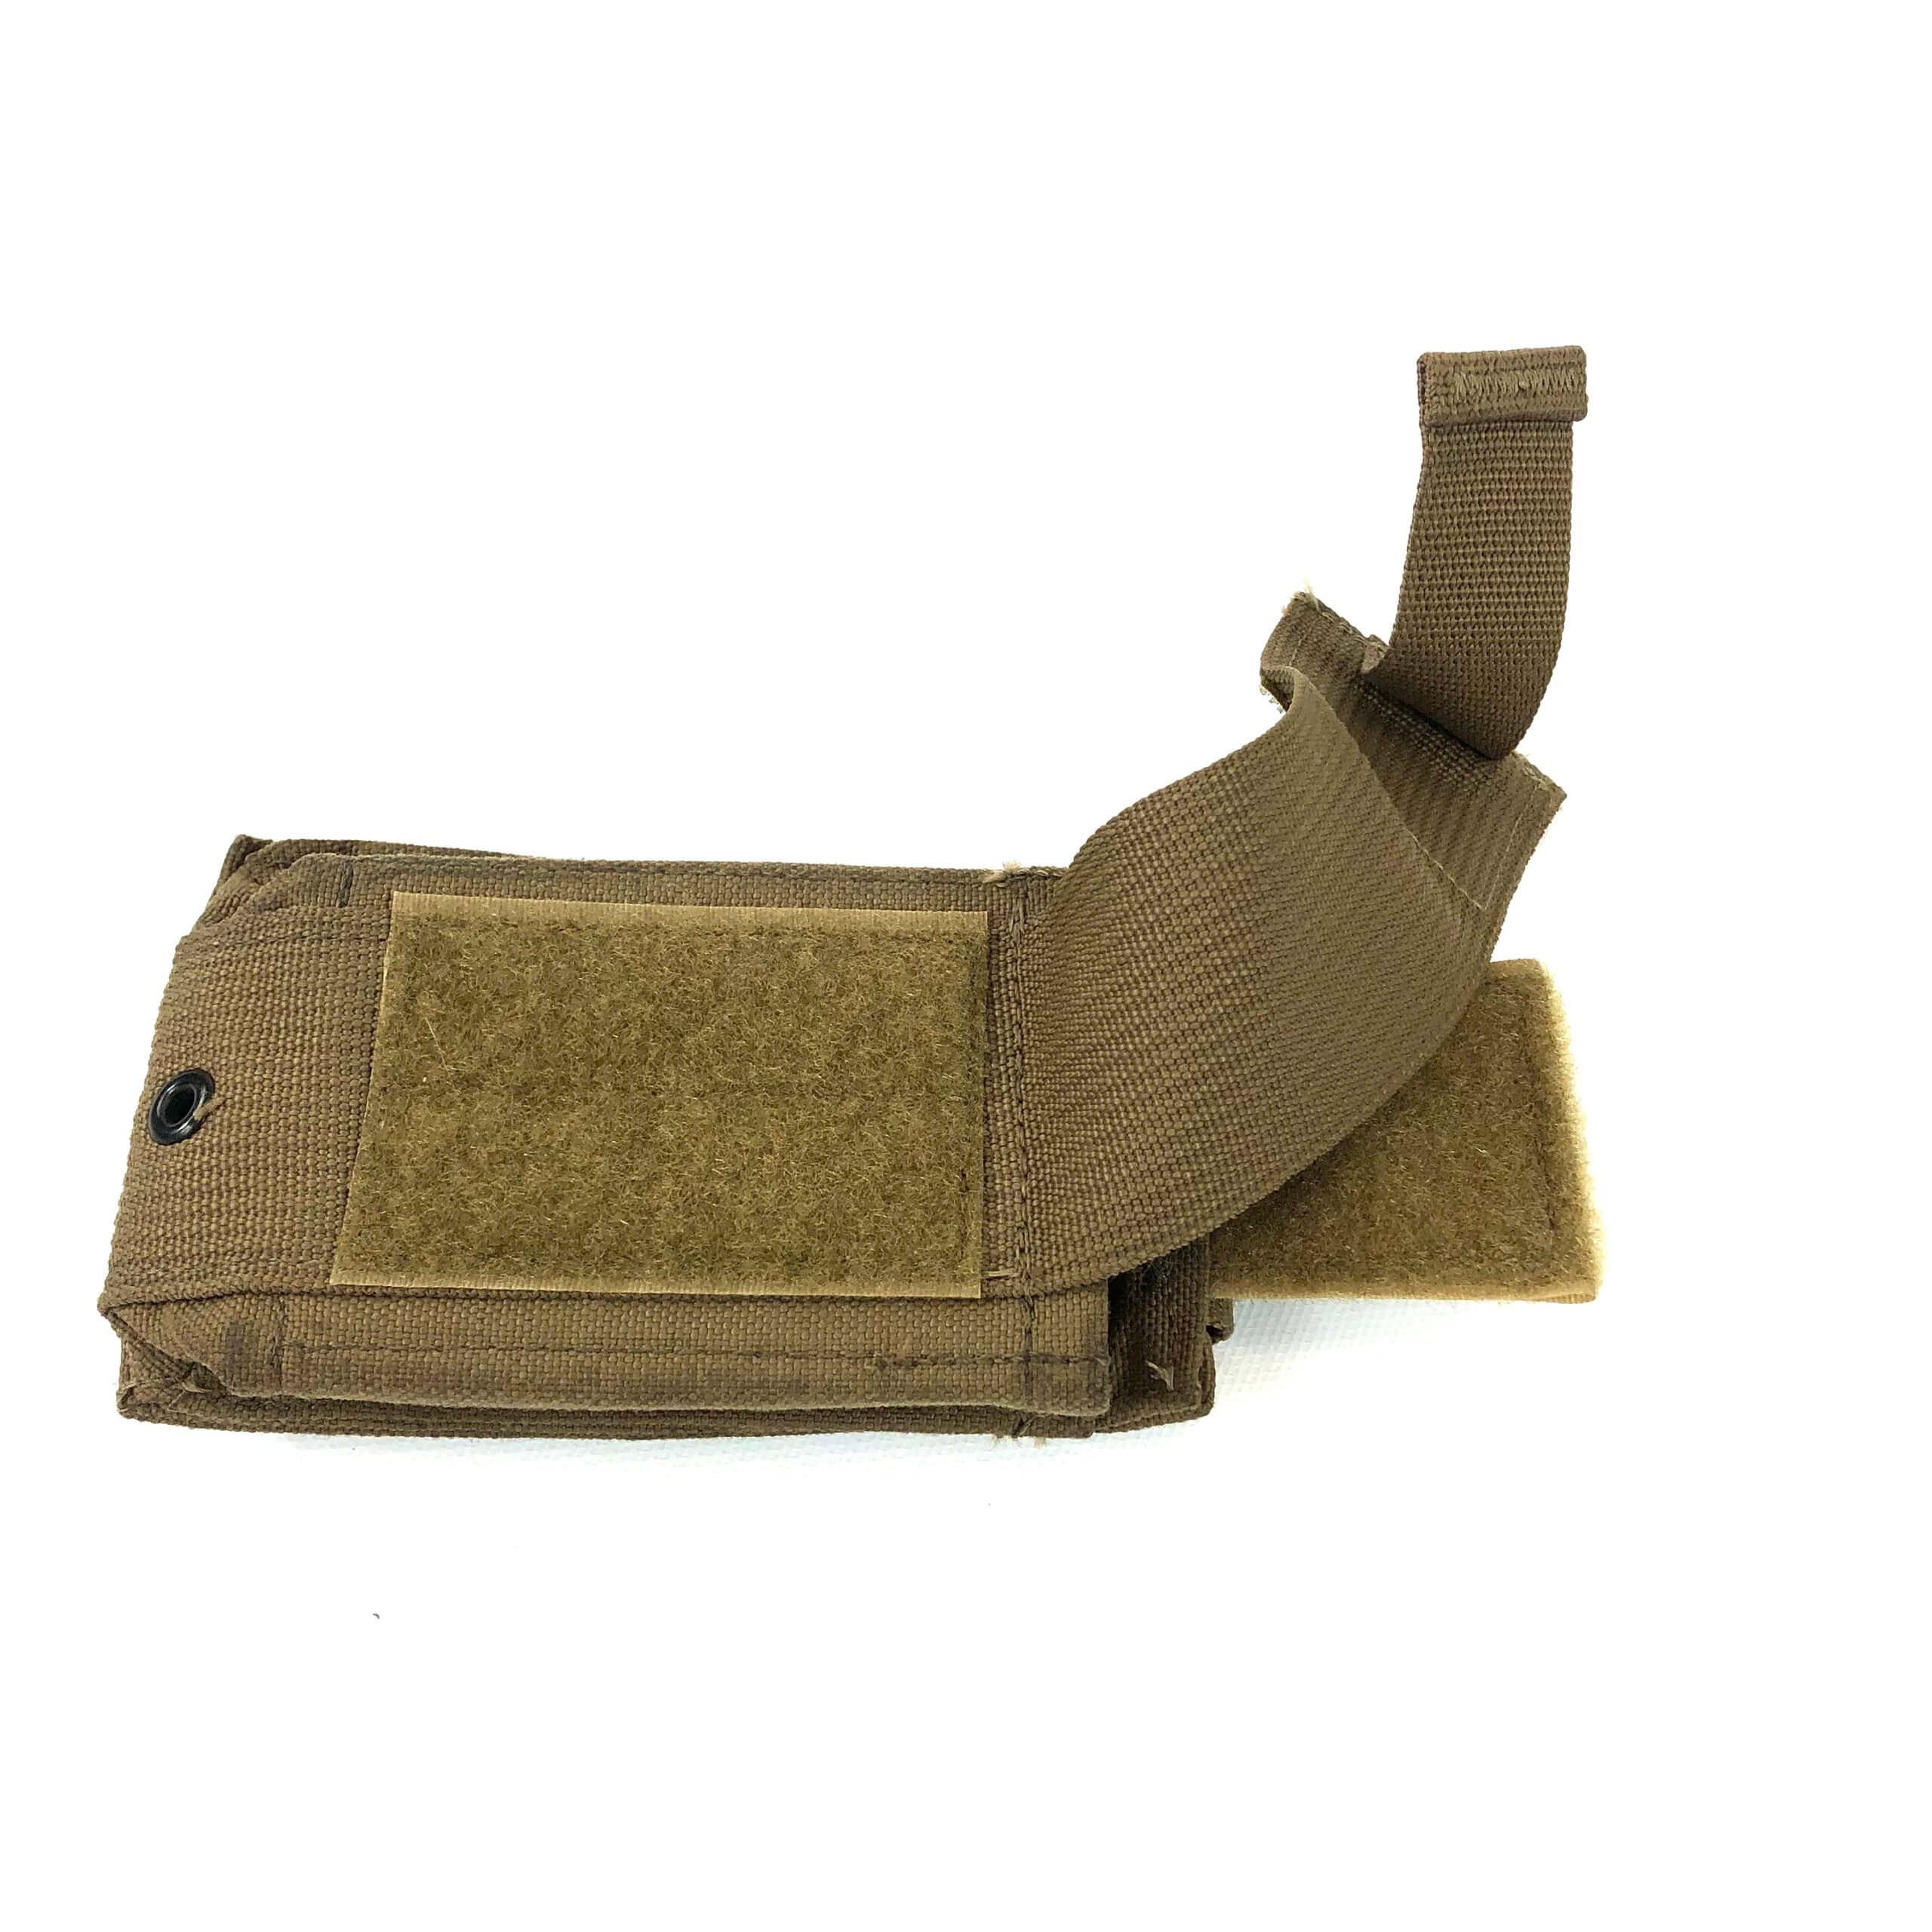 SET 2 NEW USMC Marine Corps SPEED RELOAD Single Magazine Mag Pouch Coyote Brown